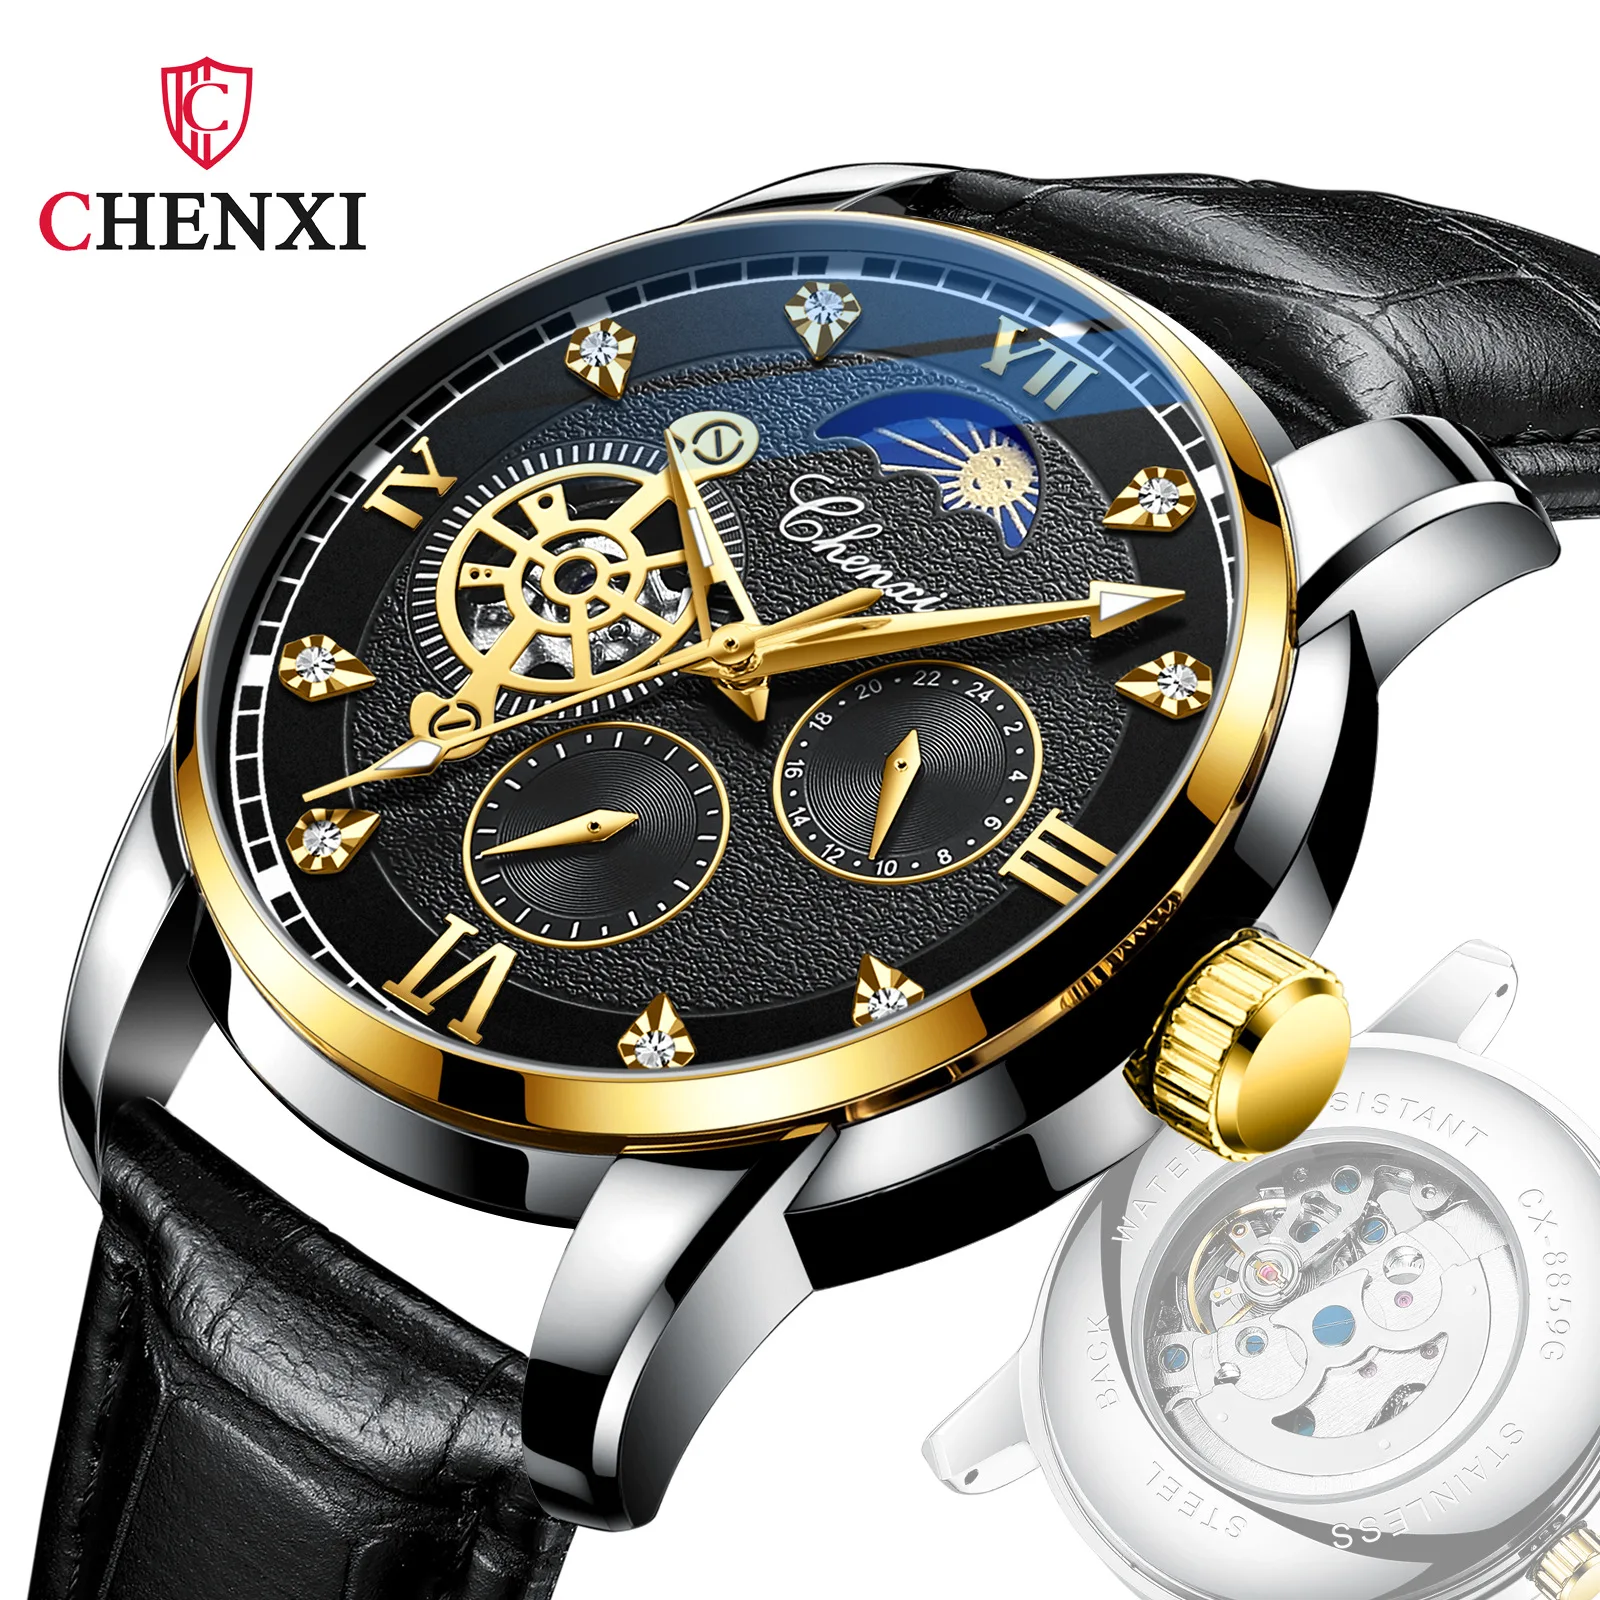 CHENXI Sport Mechanical Watch Men's Moonphase Leather Strap Business Waterproof Glow in The Dark Automatic Mechanical Watch